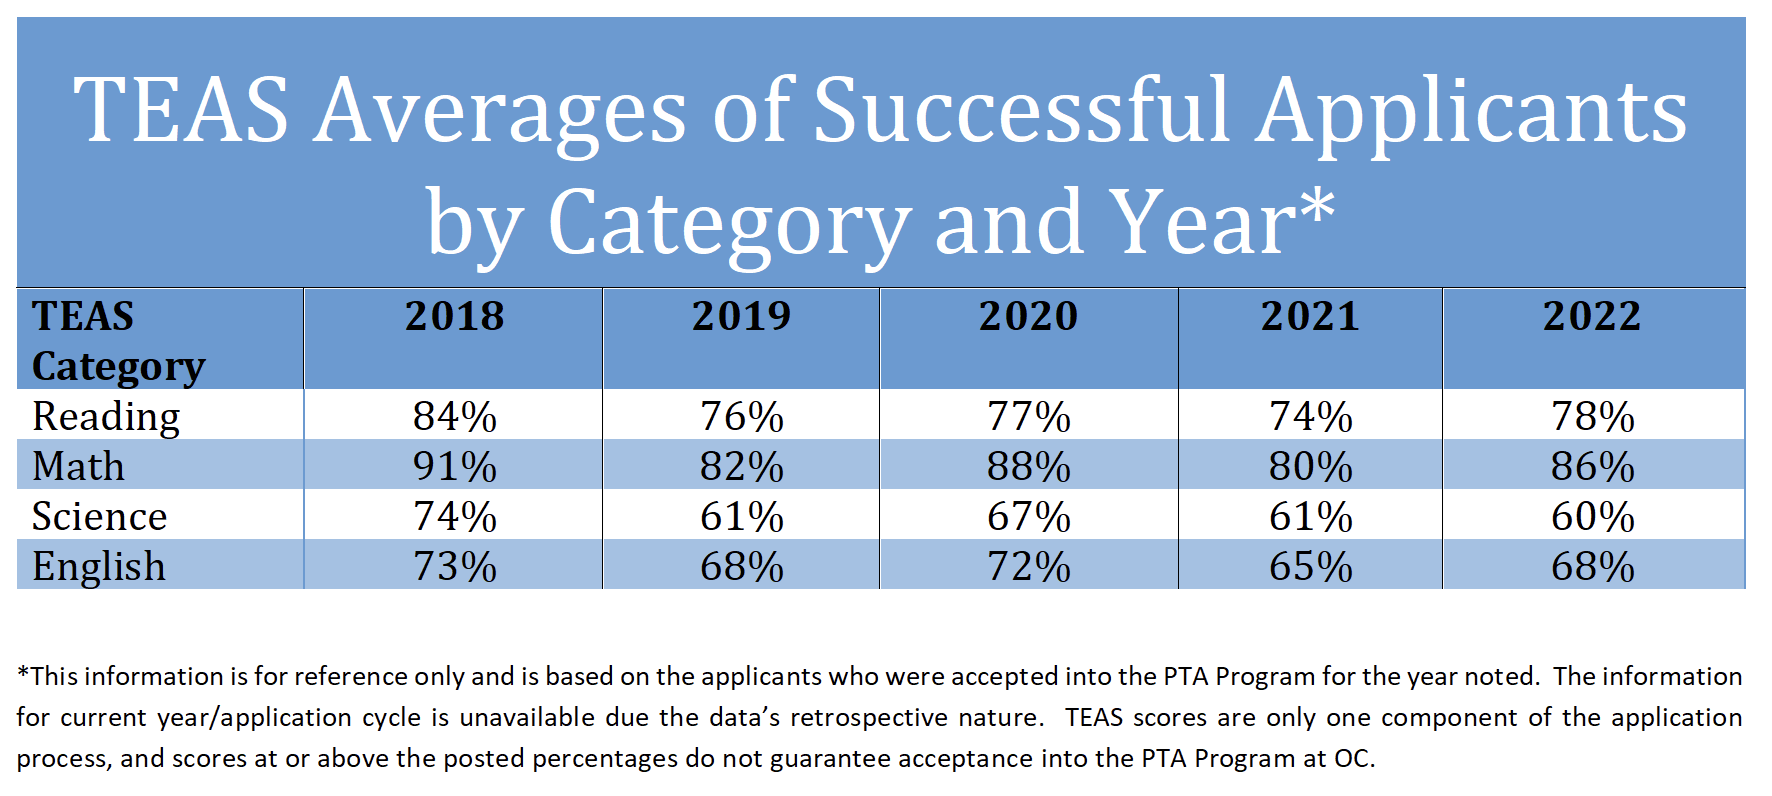 TEAS-Avg-of-Successful-Applicants-2022.png